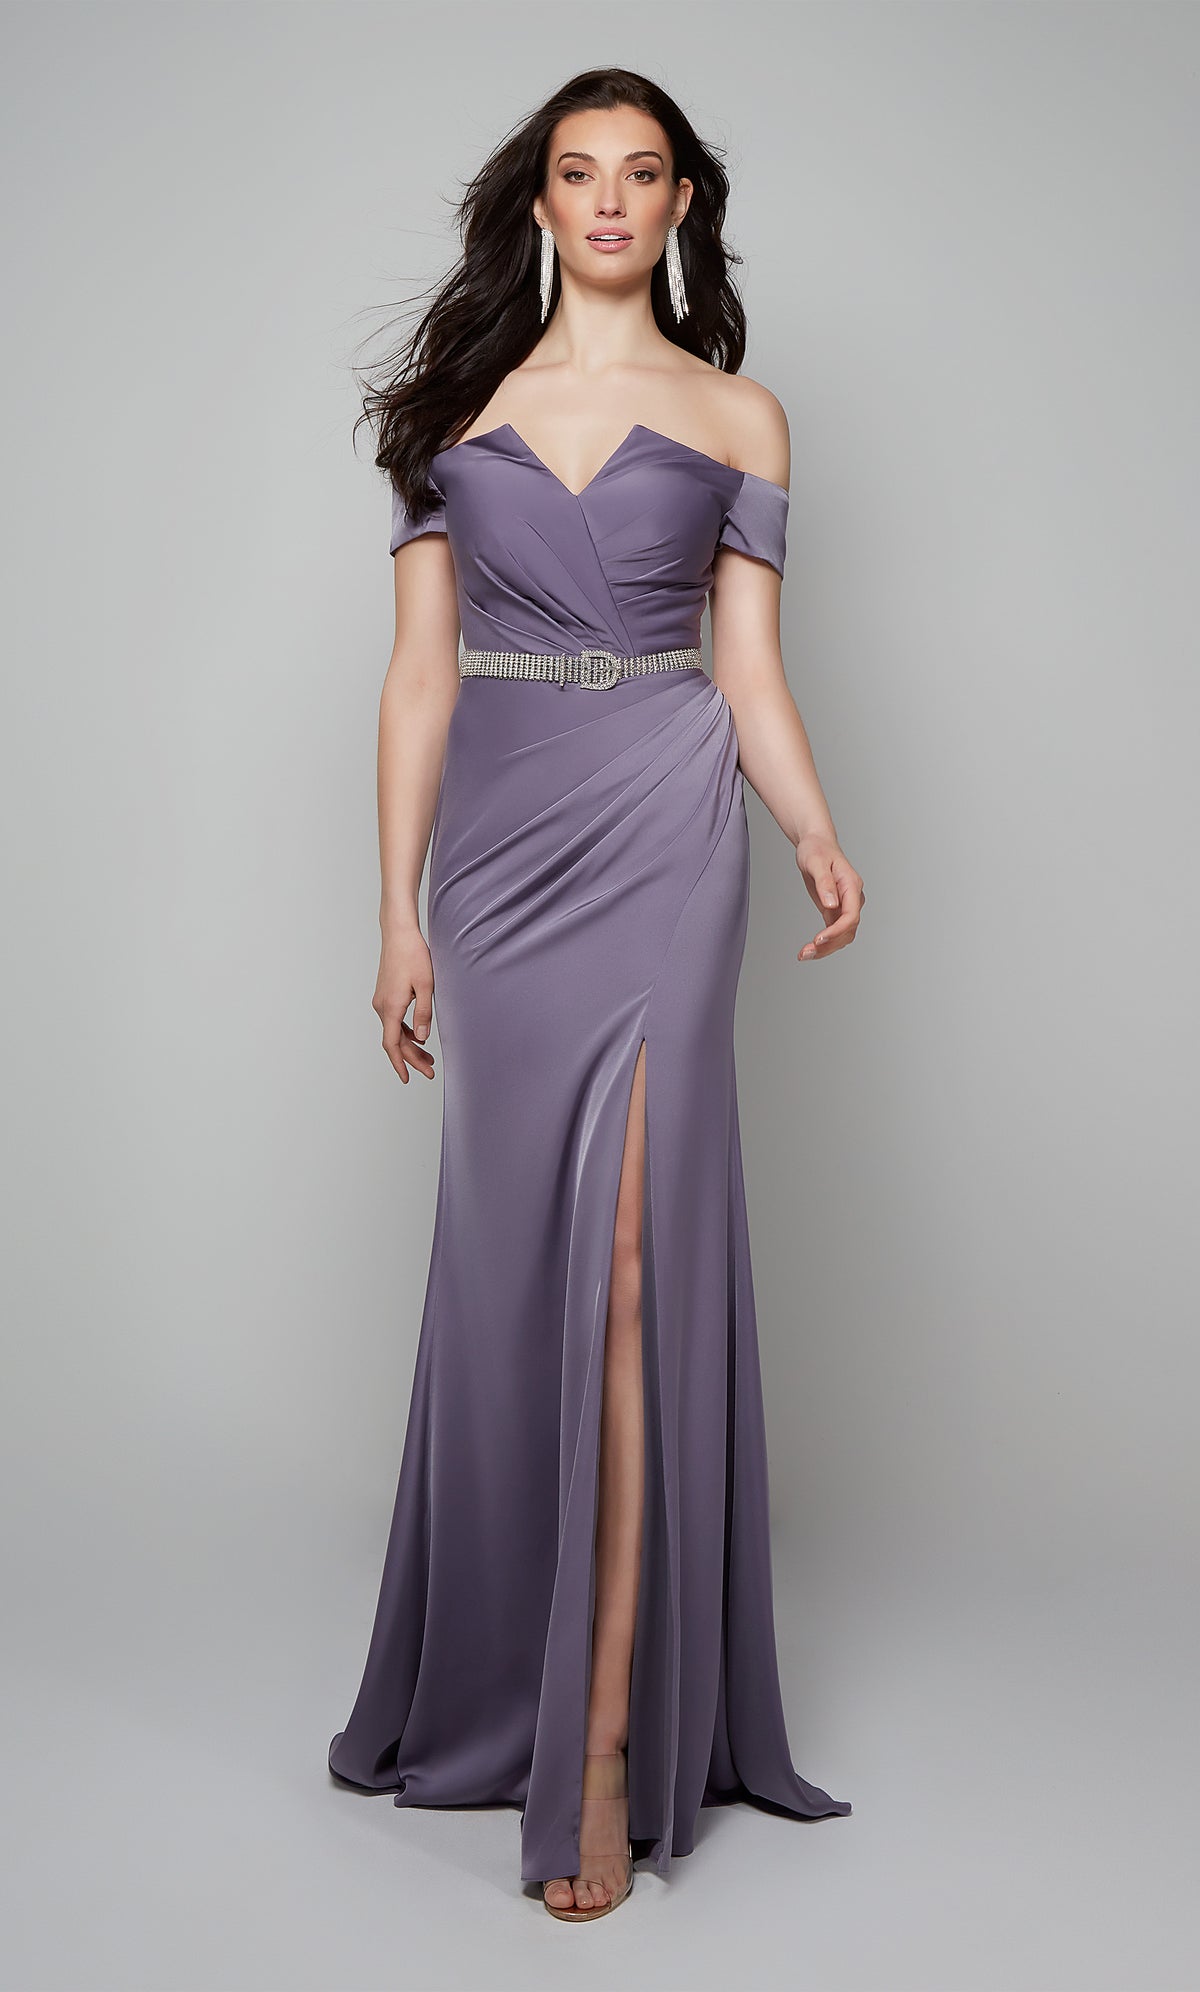 Purple off the shoulder formal dress with pleated bodice, ruching detail, and side slit.